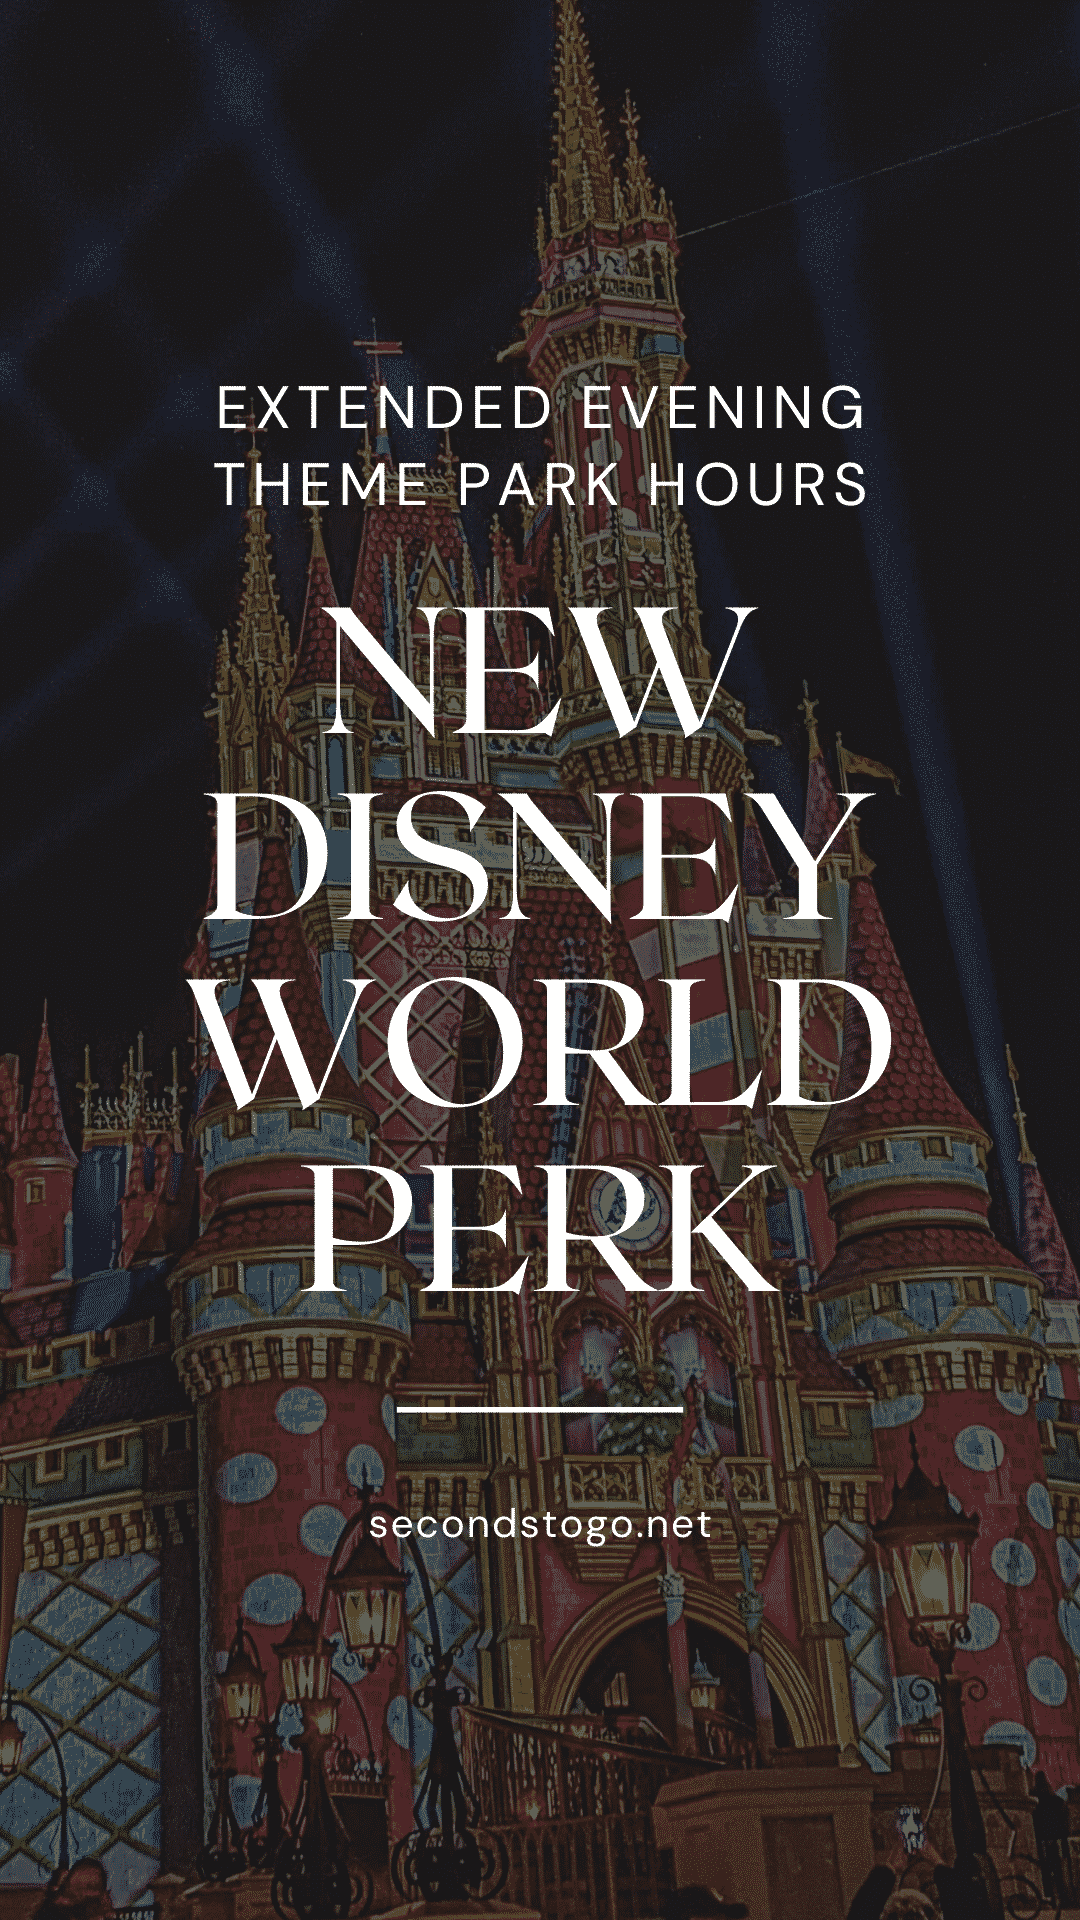 Extended Evening Theme Park Hours Yet Another Reason To Splurge On Your Disney World Vacation